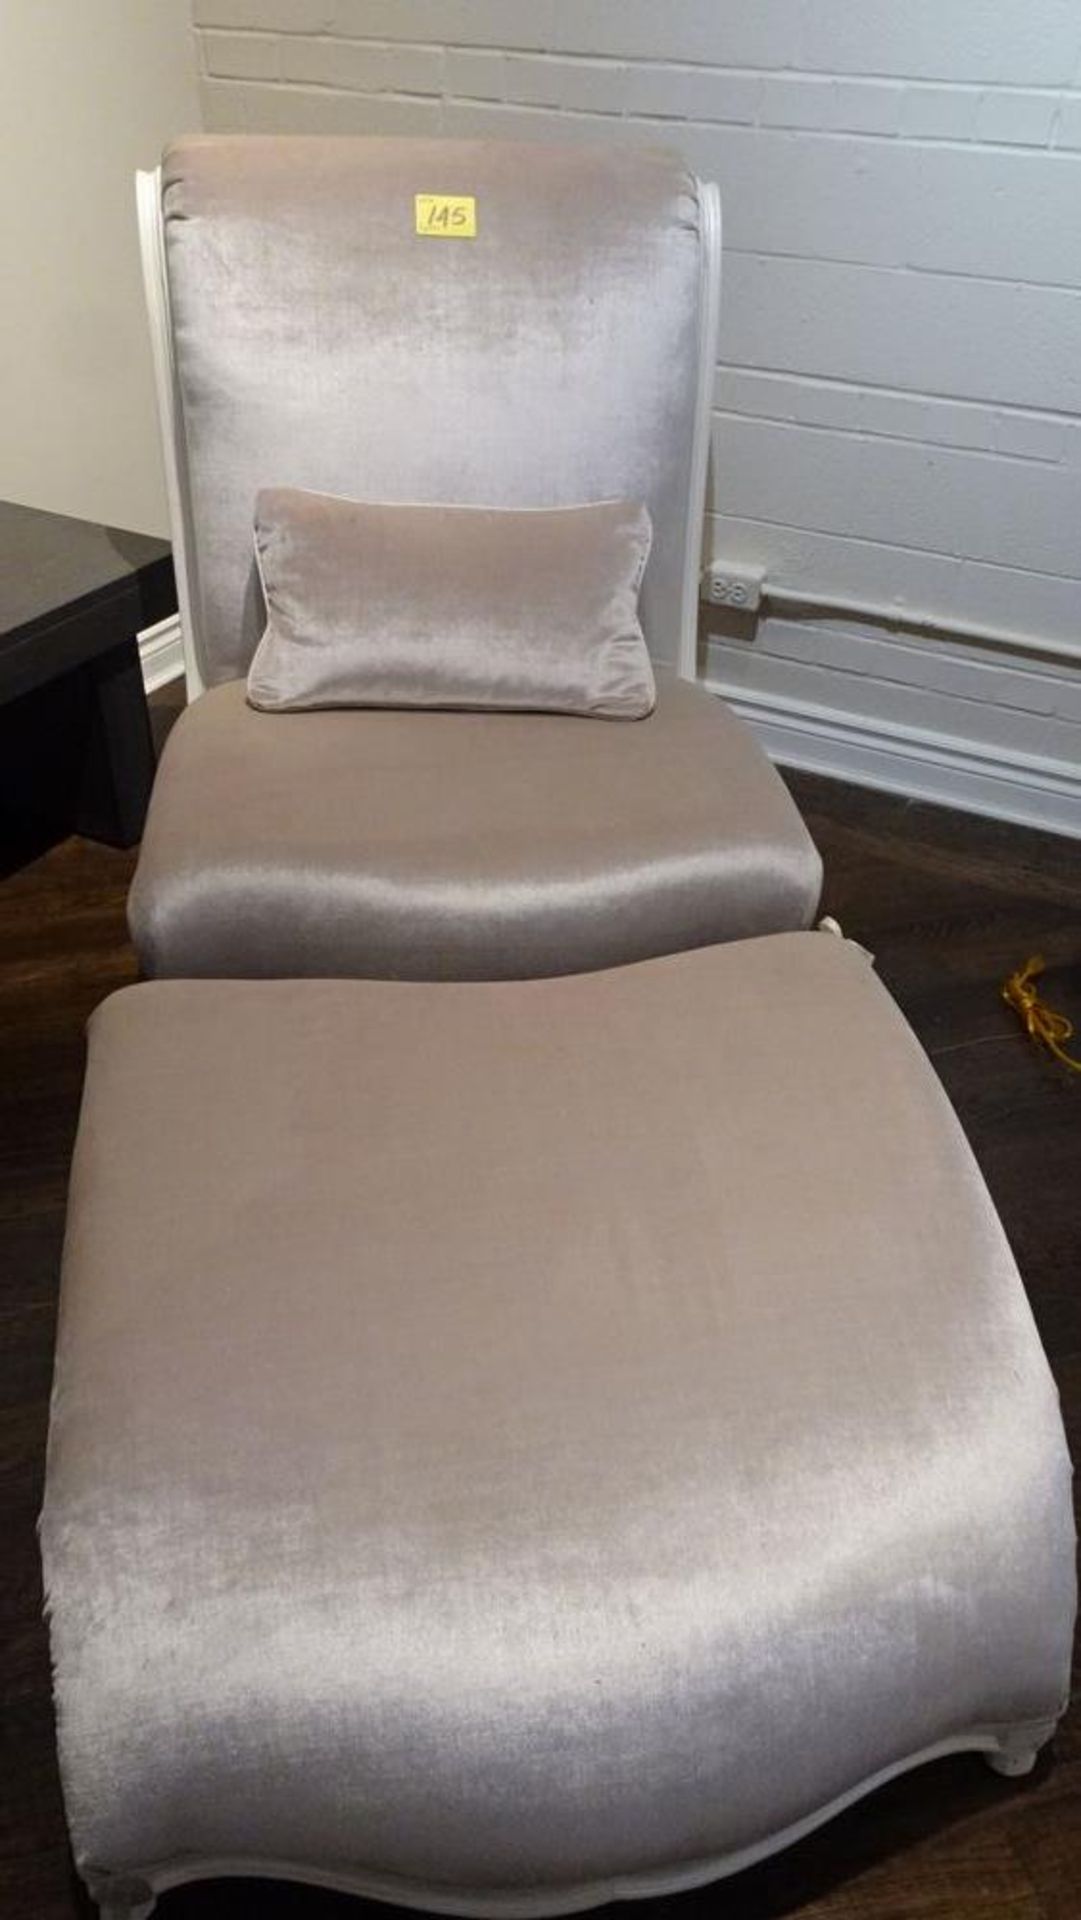 CHAISE LOUNGE - PALE PINK (MSRP $2640) (SOME DAMAGE TO PAINT)